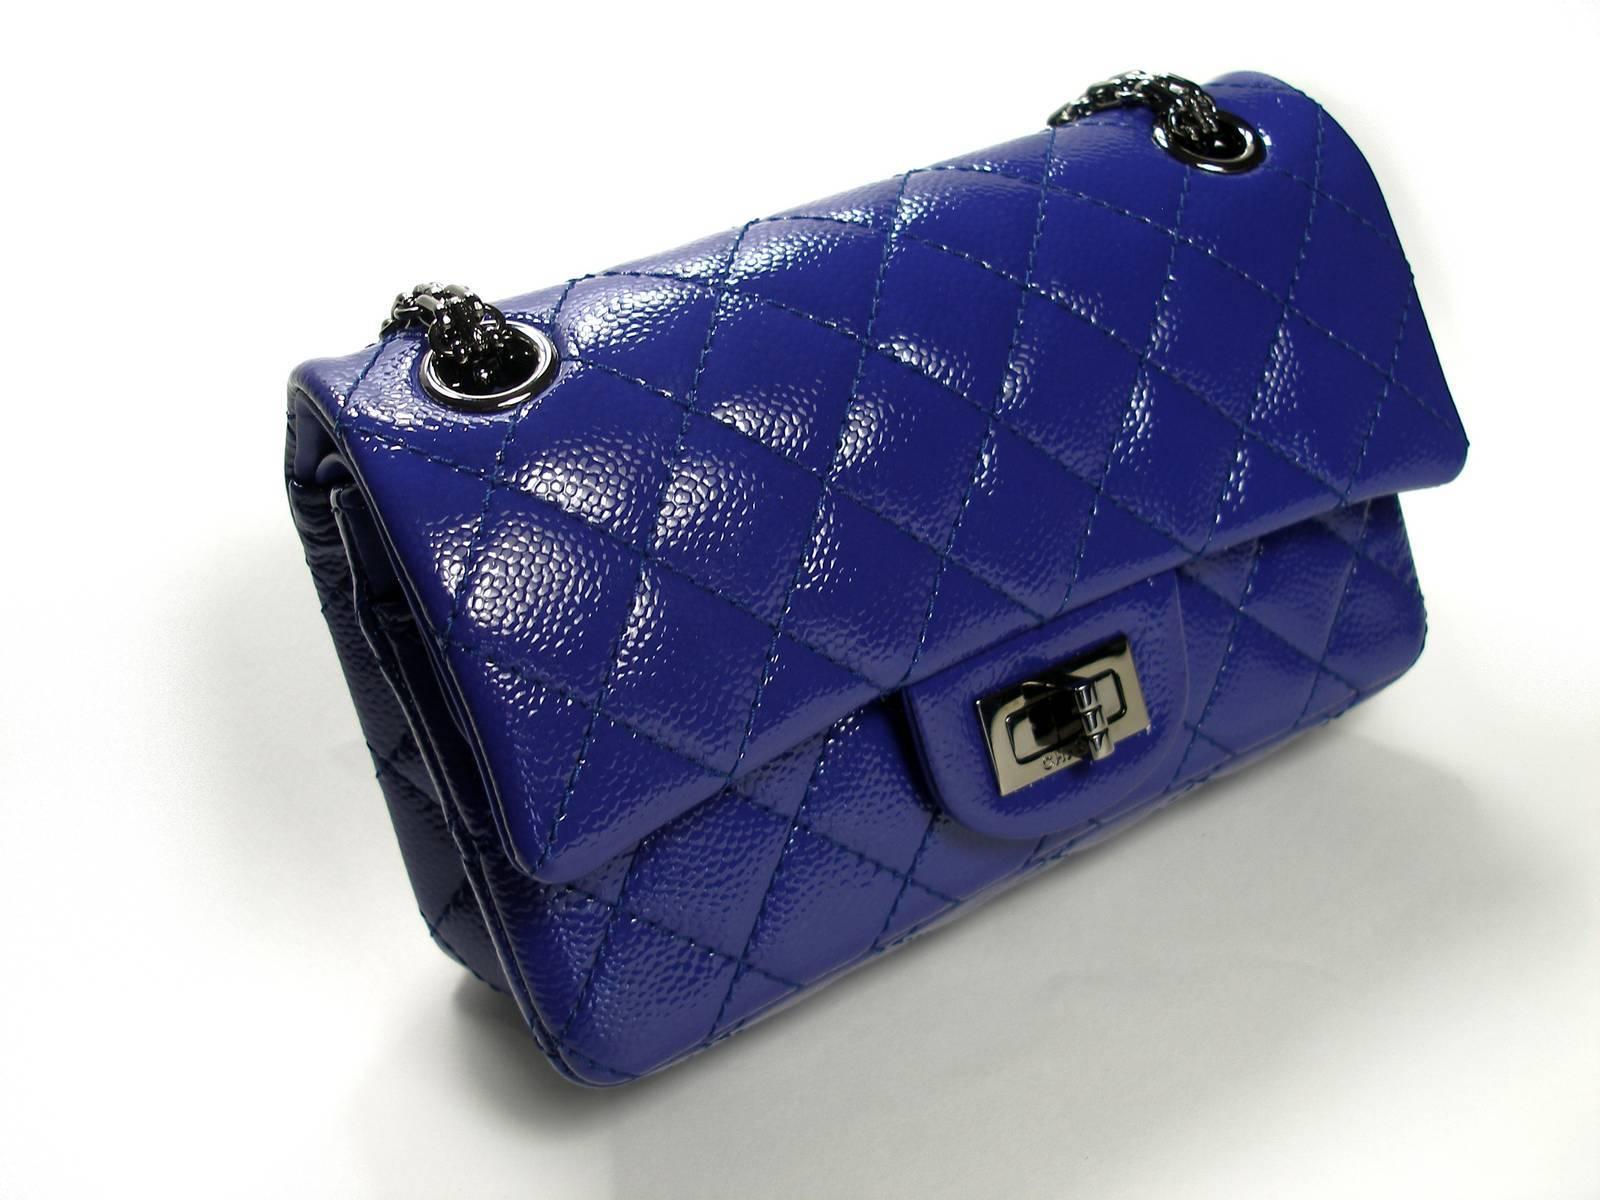 A modern and sleek bag by Chanel that is perfect for any collector or enthusiast. Glossy purple textured patent leather exterior with a quilted design. Metal grey hardware with an adjustable strap and turn lock closure. The 